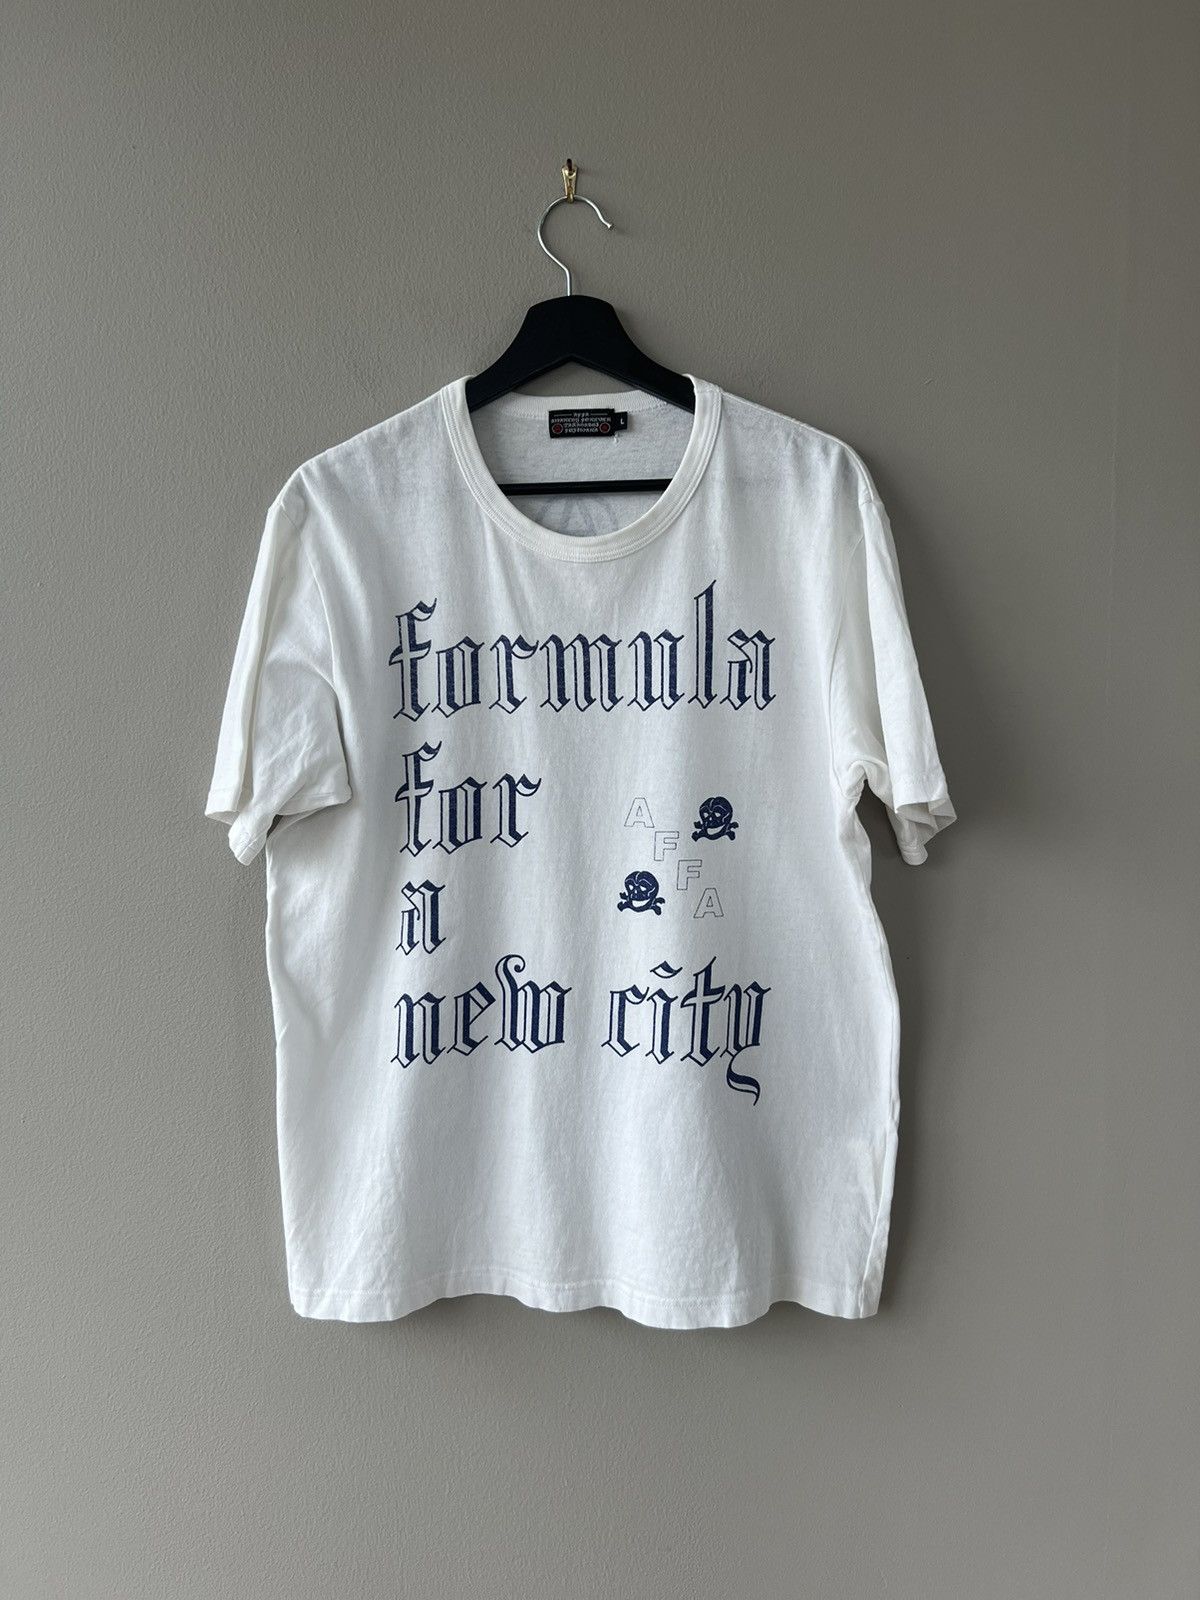 AW07 “Formula for a New City” Tee - 1